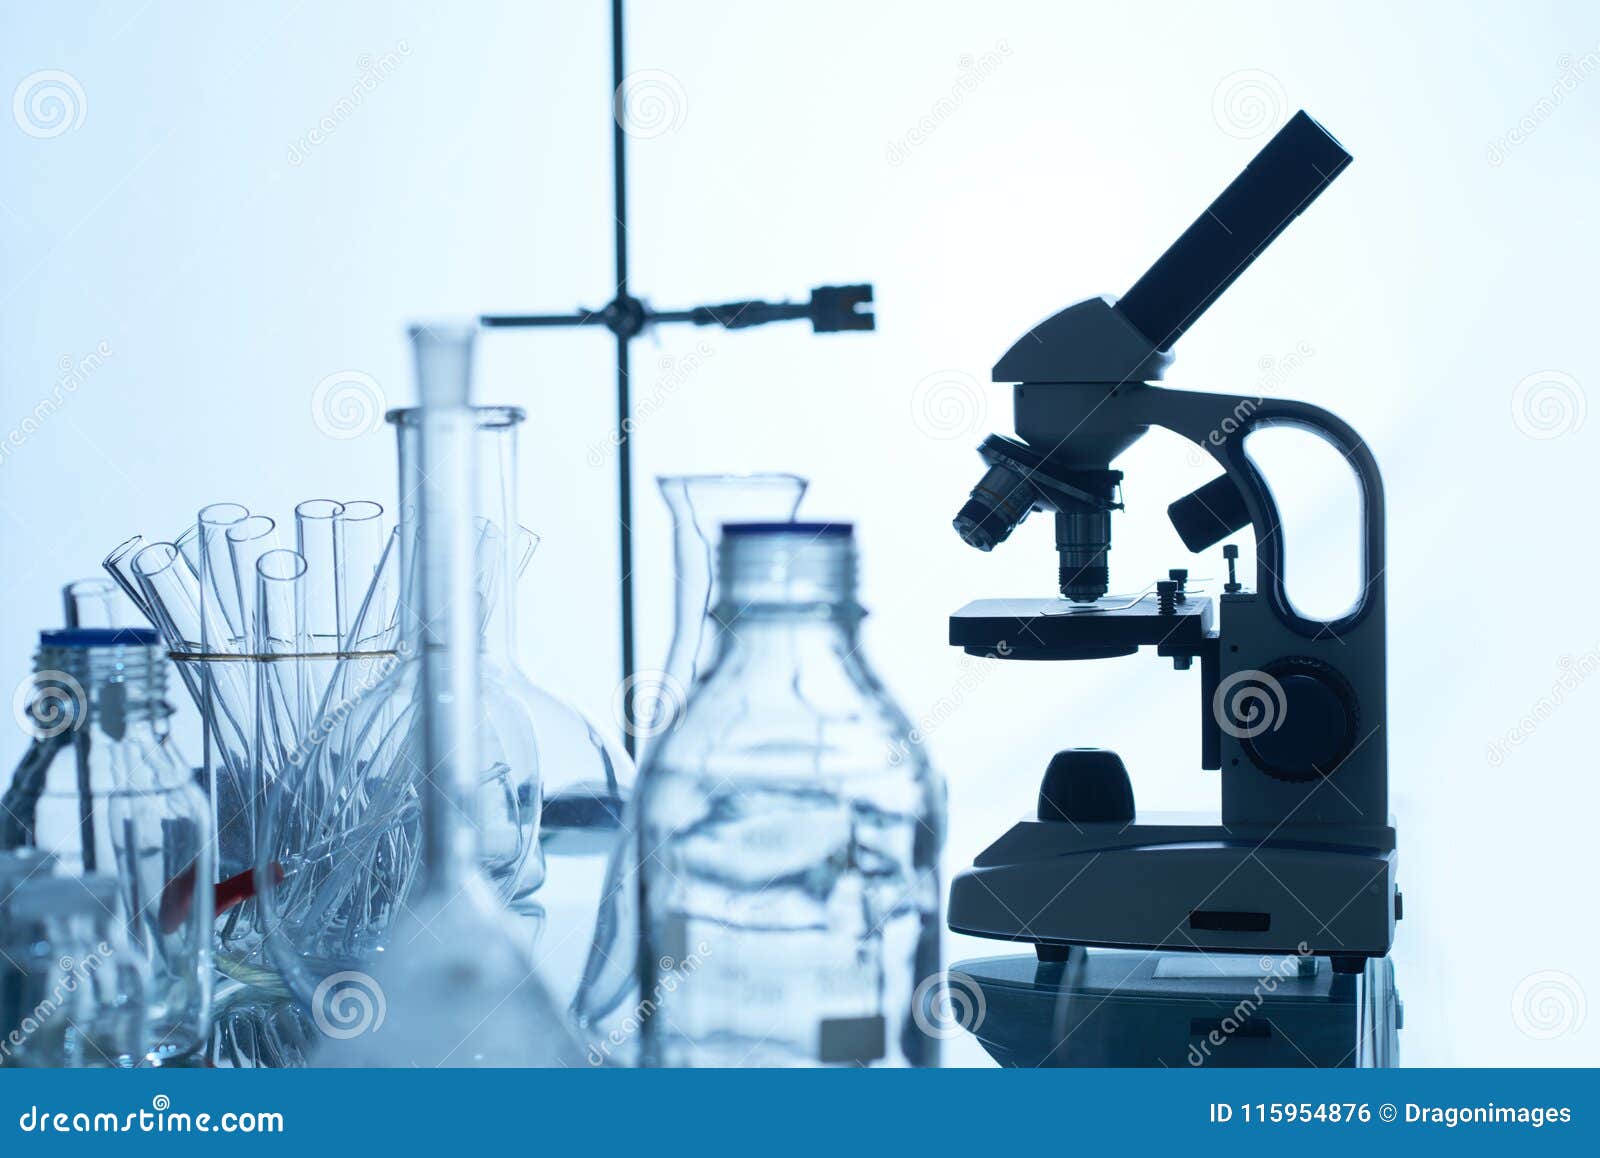 Laboratory Bench with Glassware and Equipment Stock Photo - Image of ...